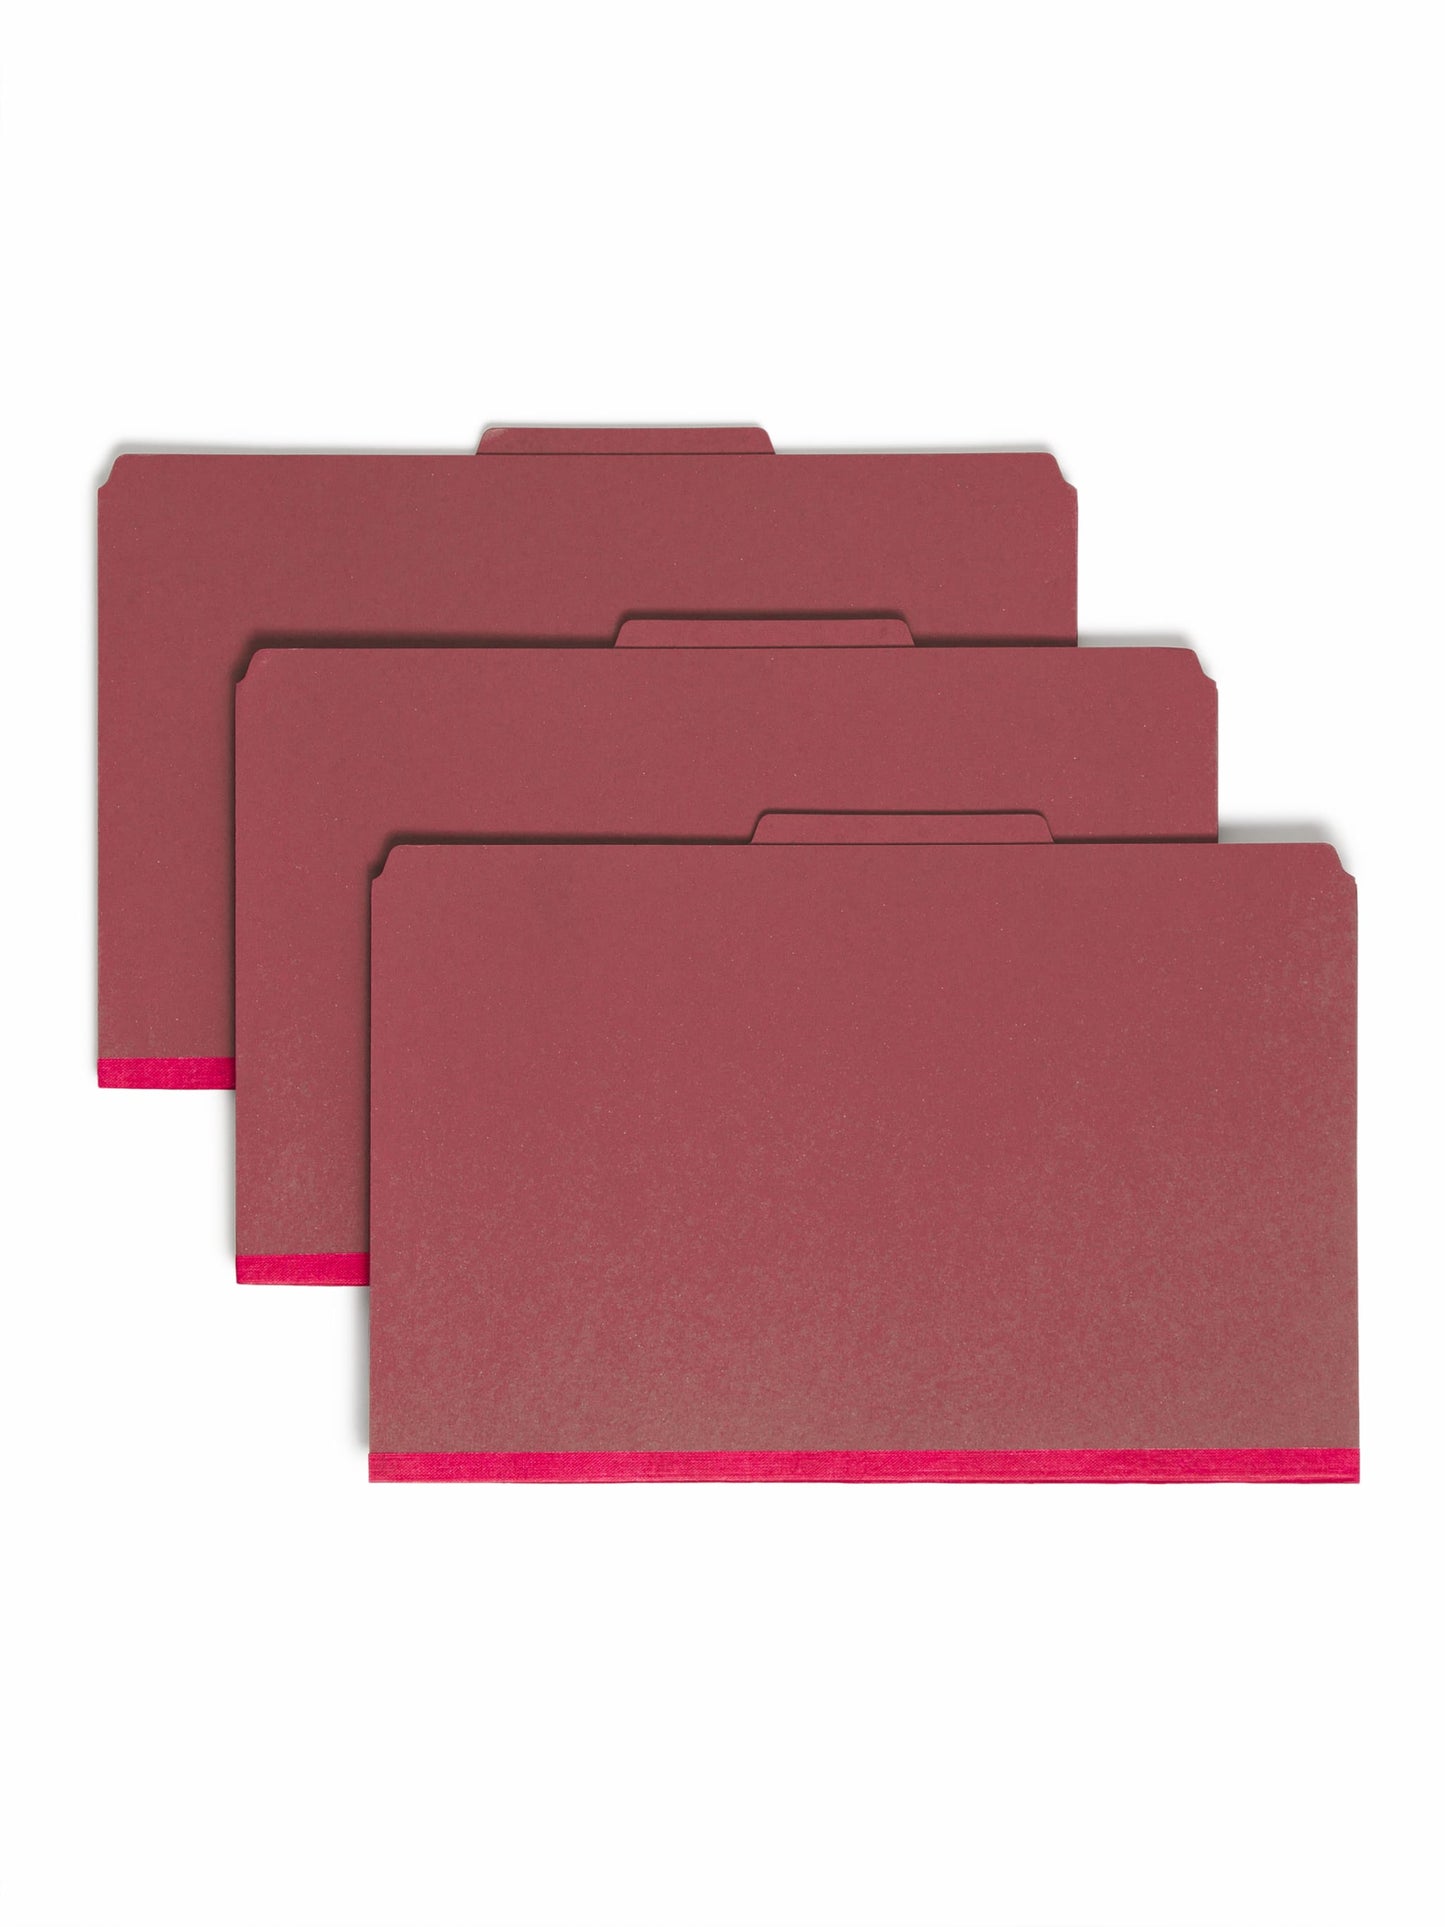 SafeSHIELD® Pressboard Classification File Folders, 2 Dividers, 2 inch Expansion, 2/5-Cut Tab, Bright Red Color, Legal Size, Set of 0, 30086486190313